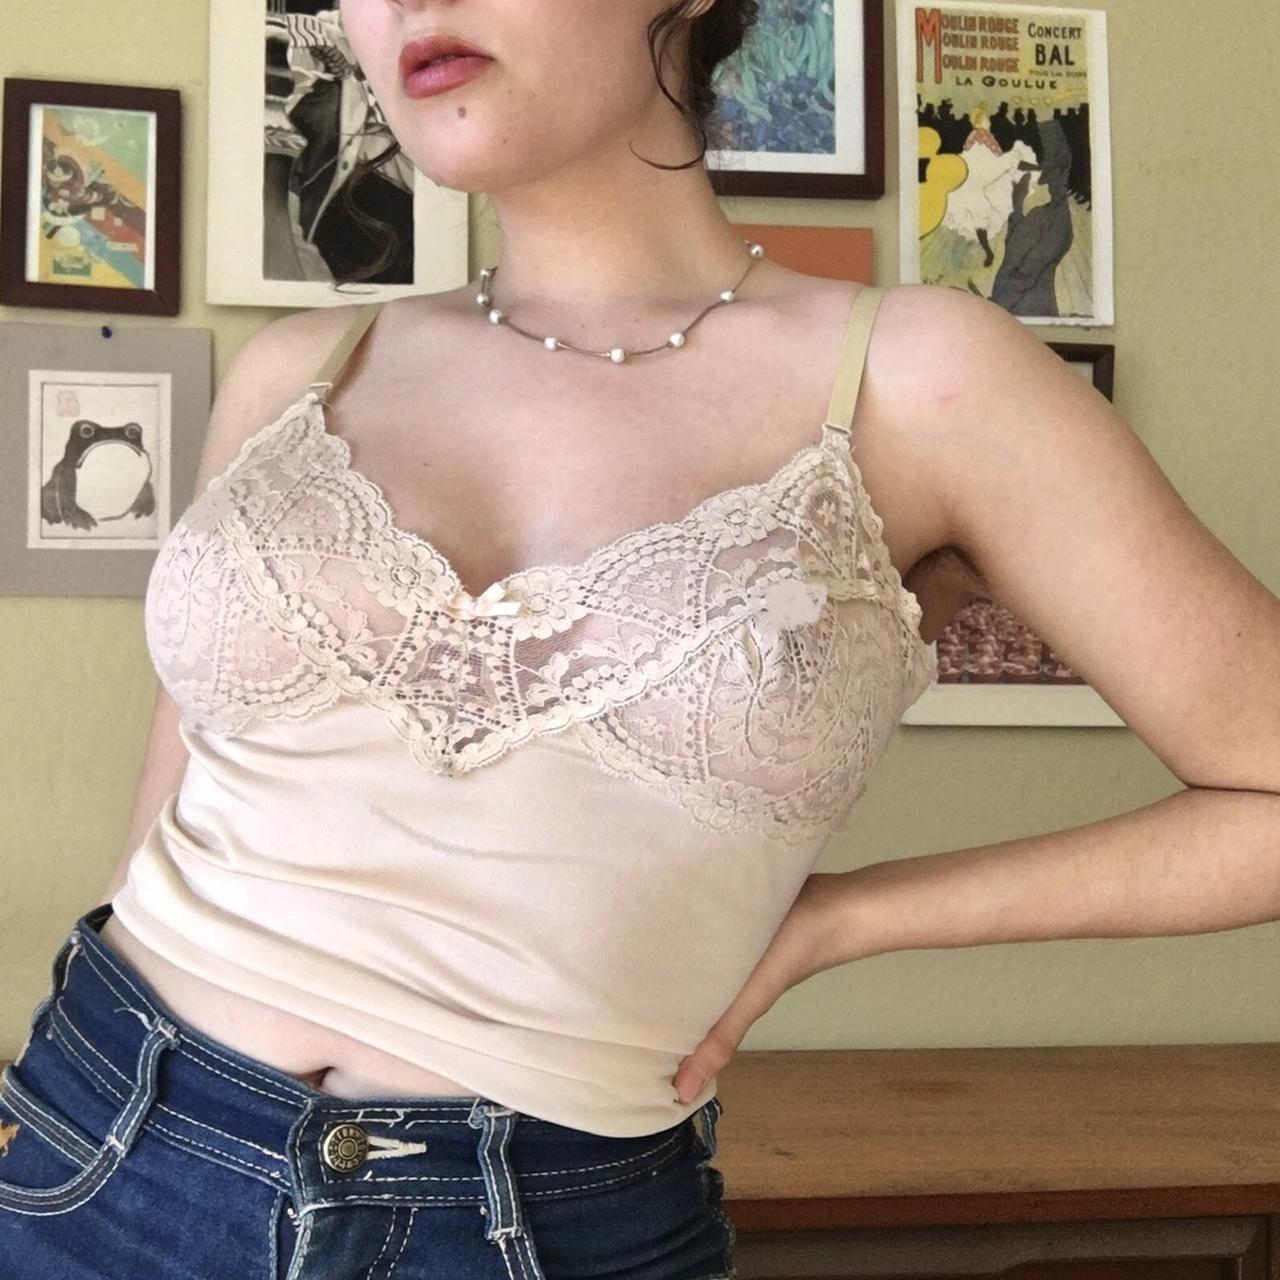 80s WHITE LACE CAMI TOP